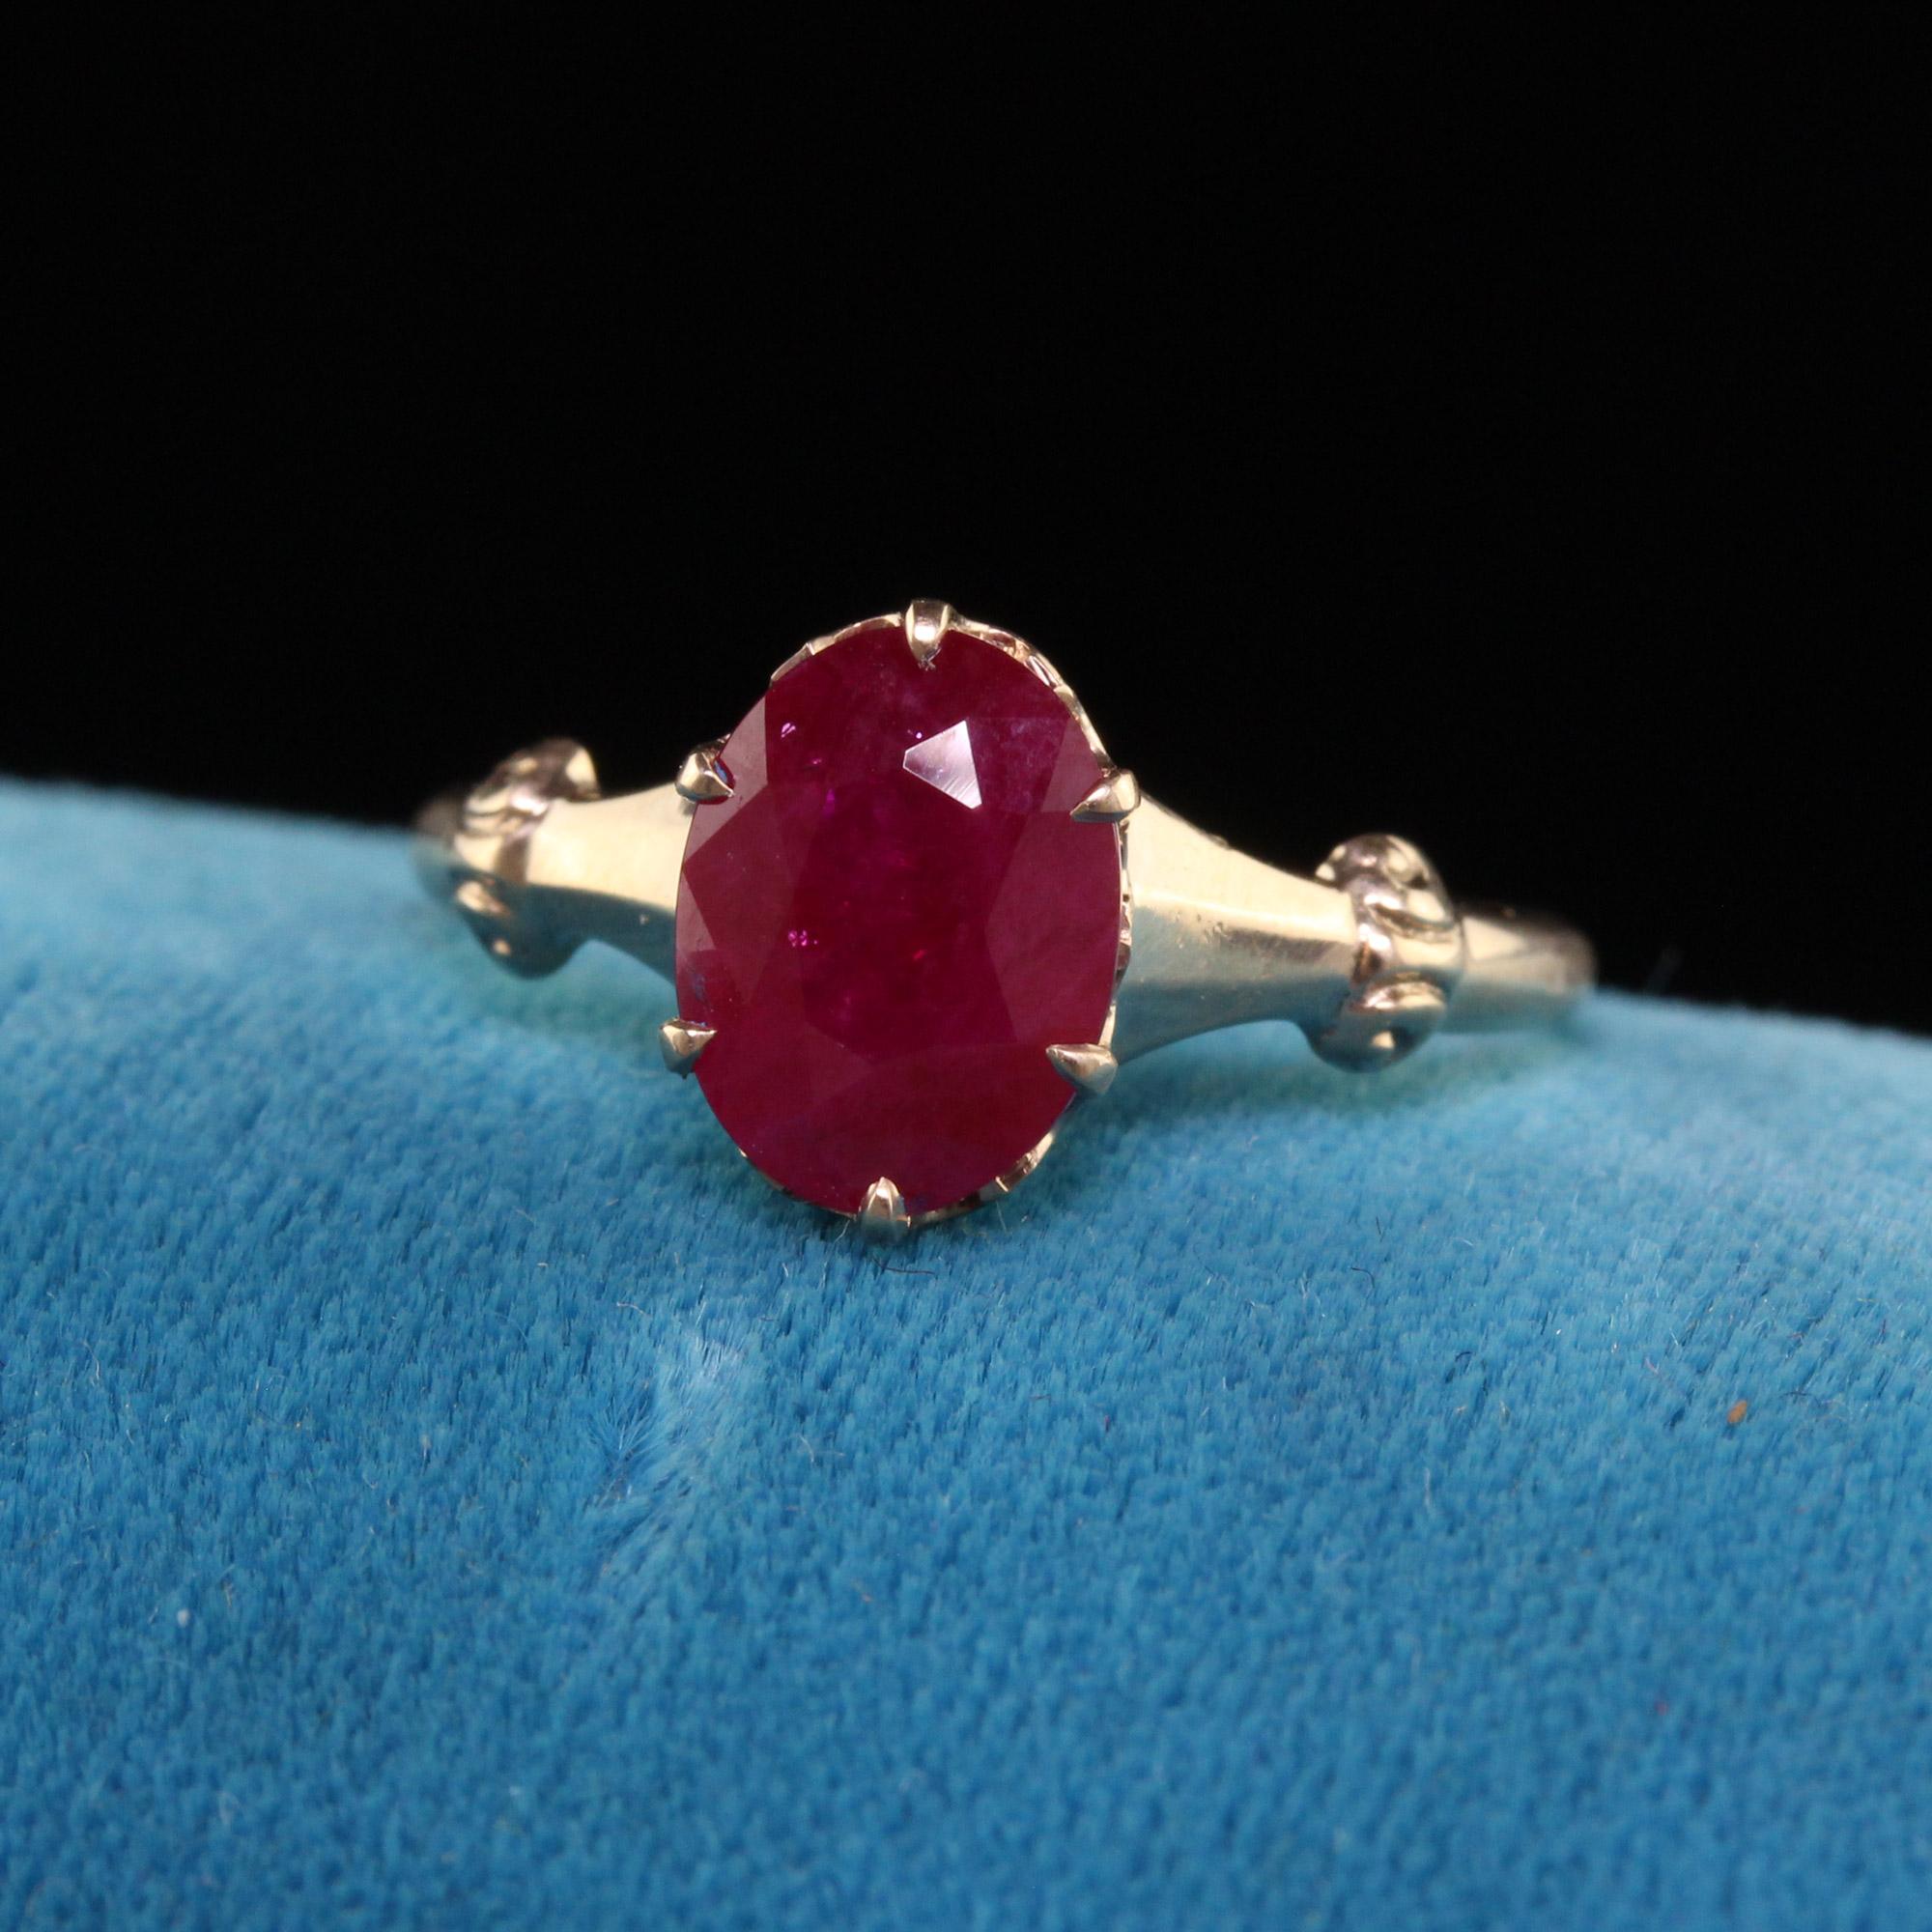 Beautiful Antique Victorian 10K Yellow Gold Burmese Ruby Engagement Ring. This beautiful ring is crafted in 10k yellow gold. The center holds a red burmese ruby and is set in a classic Victorian mounting. The ring is in good condition.

Item